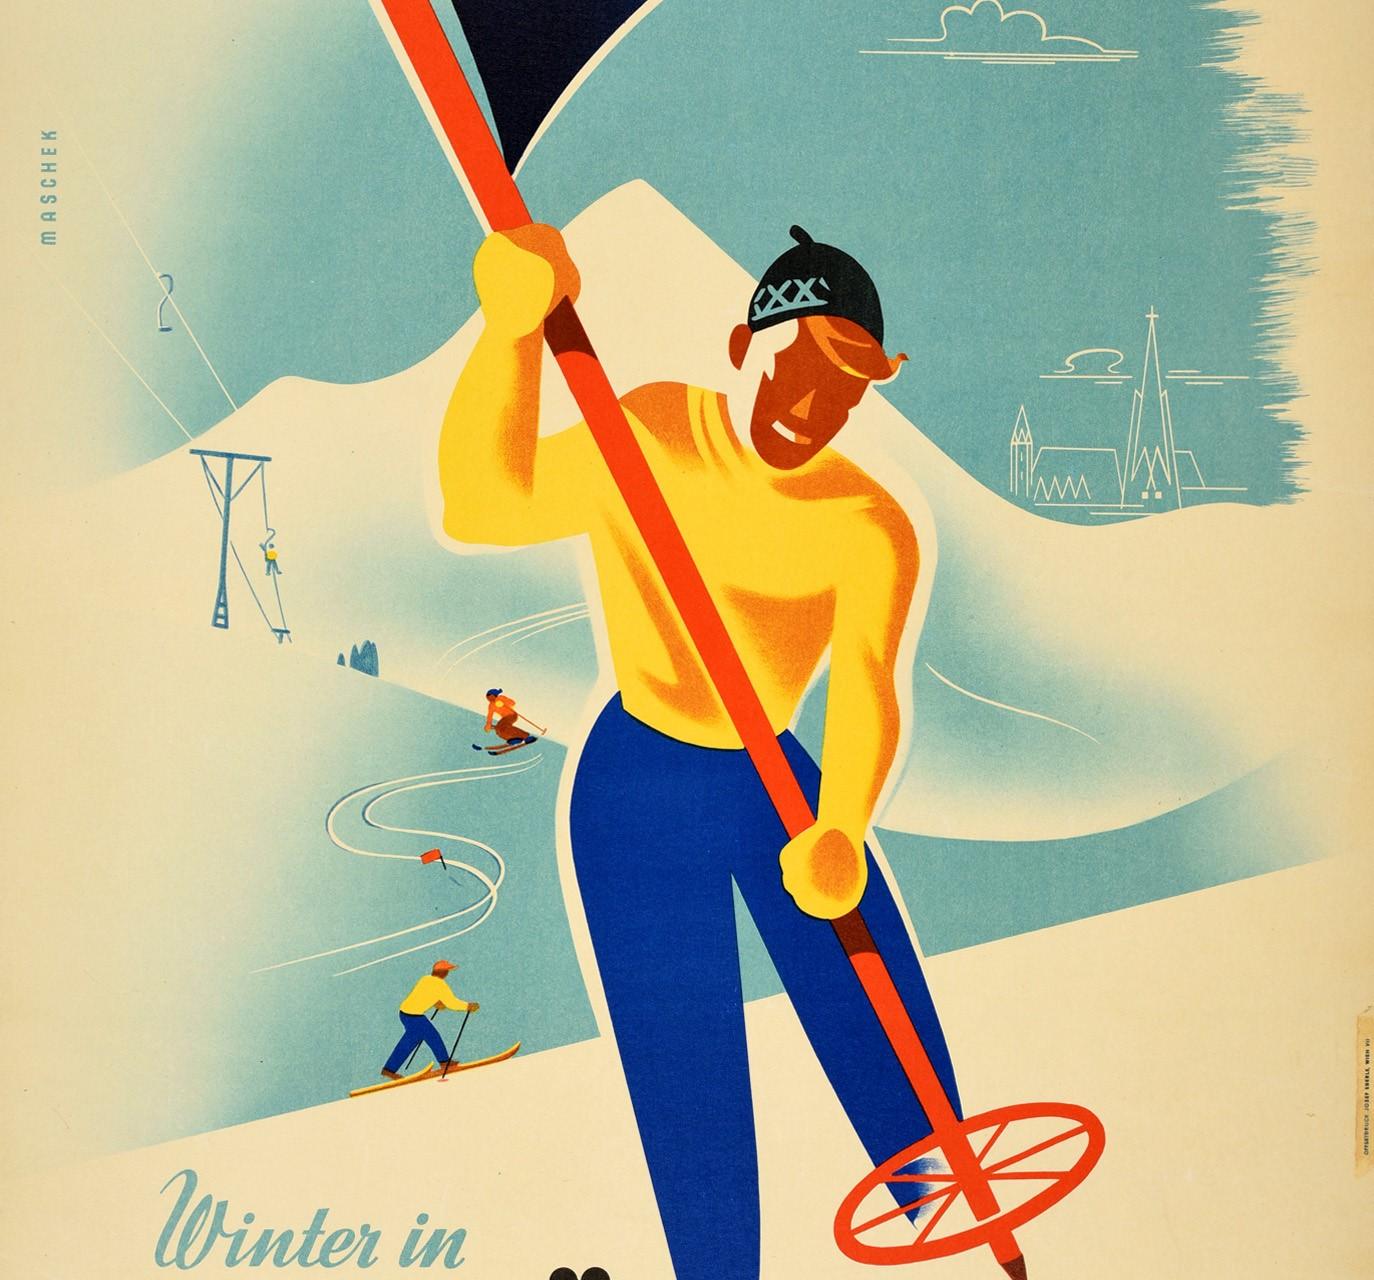 Original vintage alpine winter sport and skiing poster - Winter in Niederosterreich / Lower Austria – featuring a great illustration depicting a skier in a colourful yellow top with blue trousers sticking a ski pole flying a blue and yellow flag